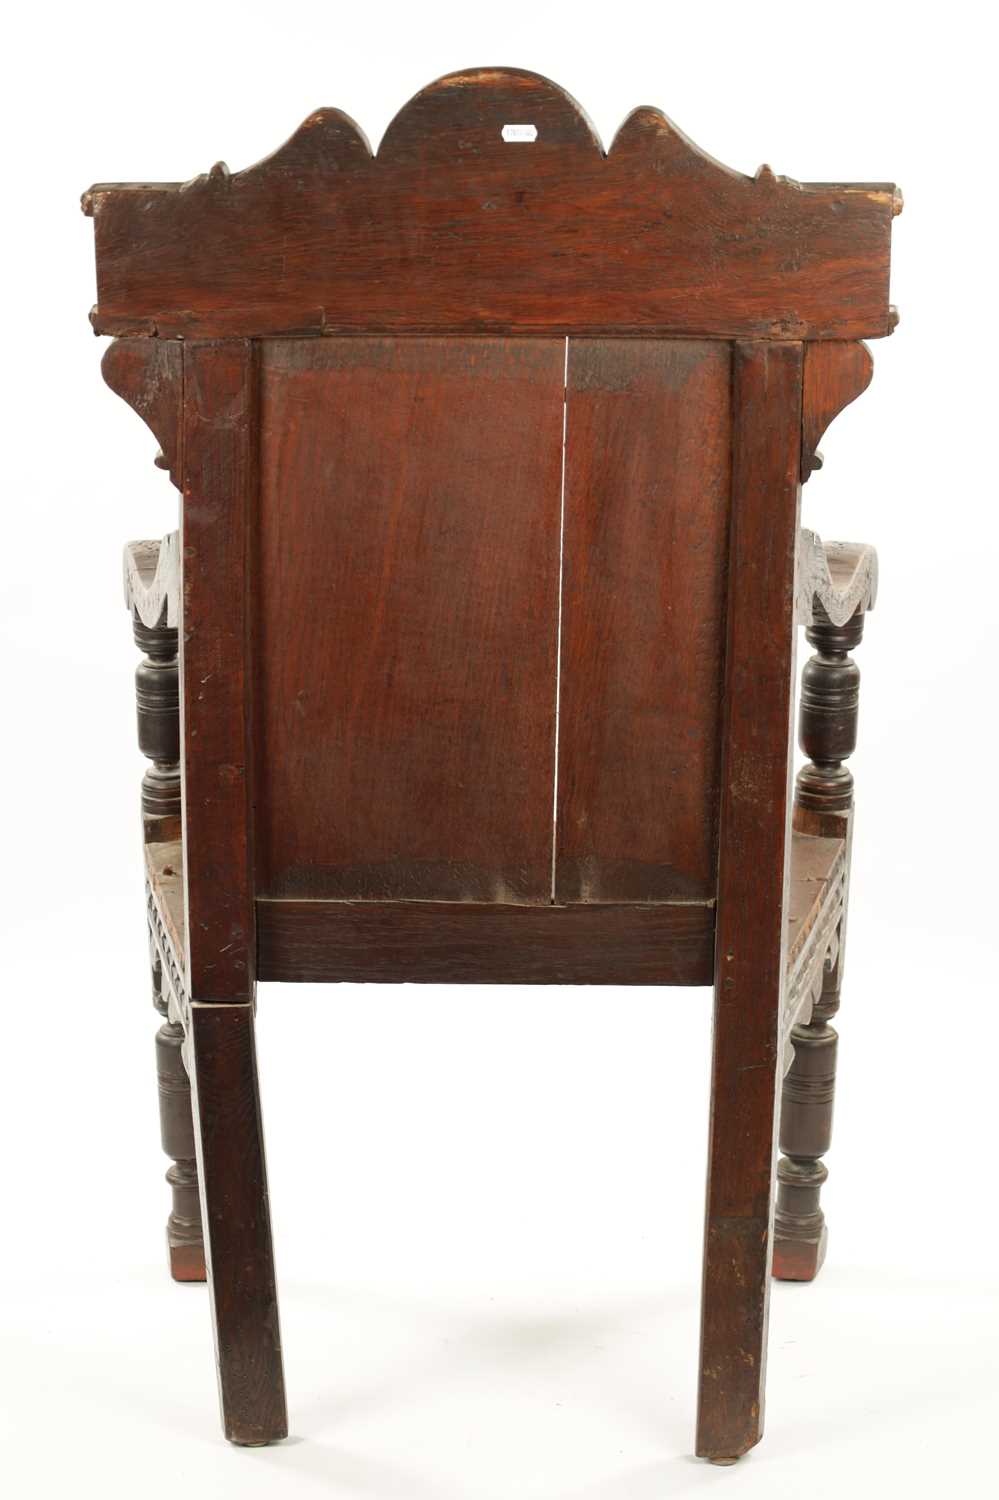 A 17TH CENTURY CARVED OAK WAINSCOT CHAIR - Image 9 of 14